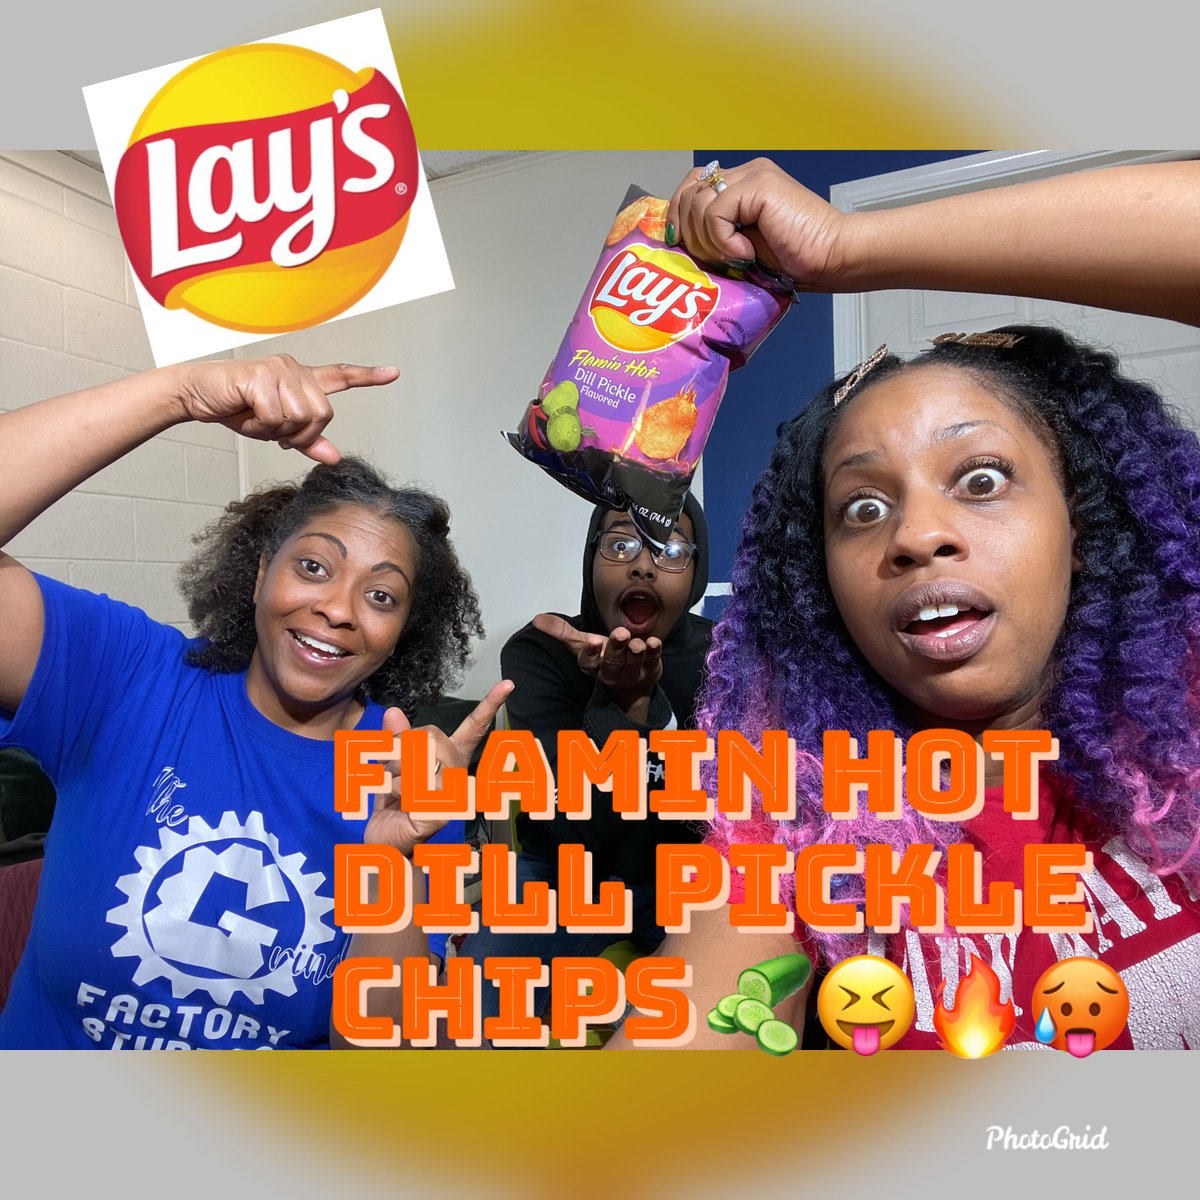 🥒🥵😝🔥
New Major Shenanigans snack review of “Lay’s Flamin Hot Dill Pickle” Potato Chips ⚙️⚙️⚙️
Full video on @YouTube ✅
youtu.be/4rsMWf8jrx4

artistecard.com/ladykayne
#snackreview #lays #flaminhot #dillpickle #flaminhotdillpickle #majorshenanigans